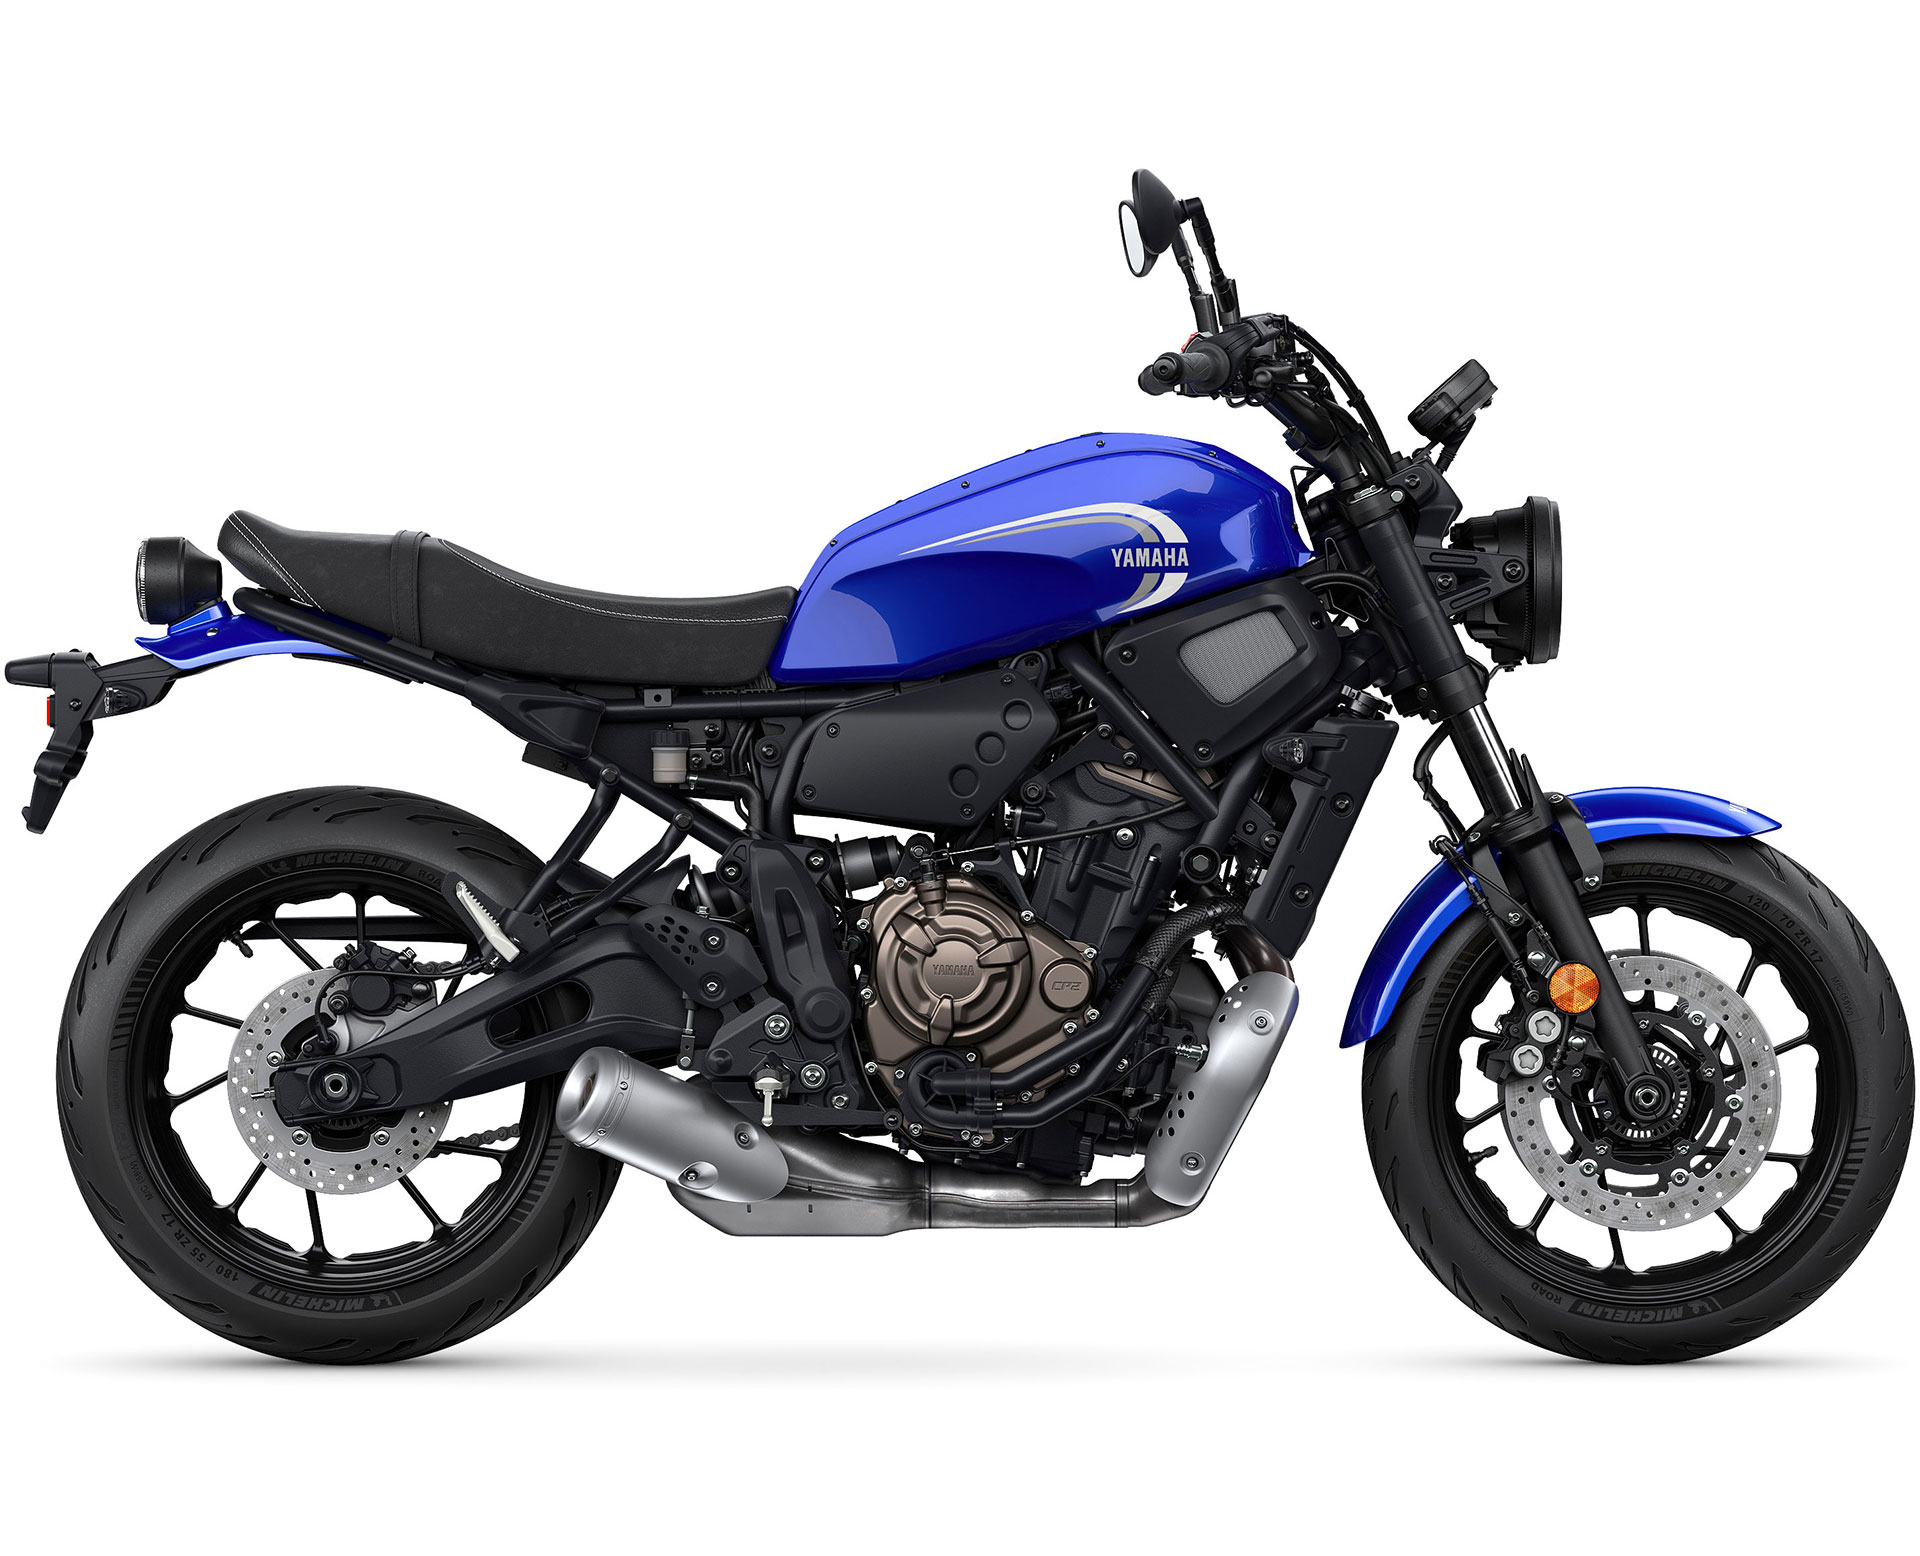 Thumbnail of your customized 2024 XSR700